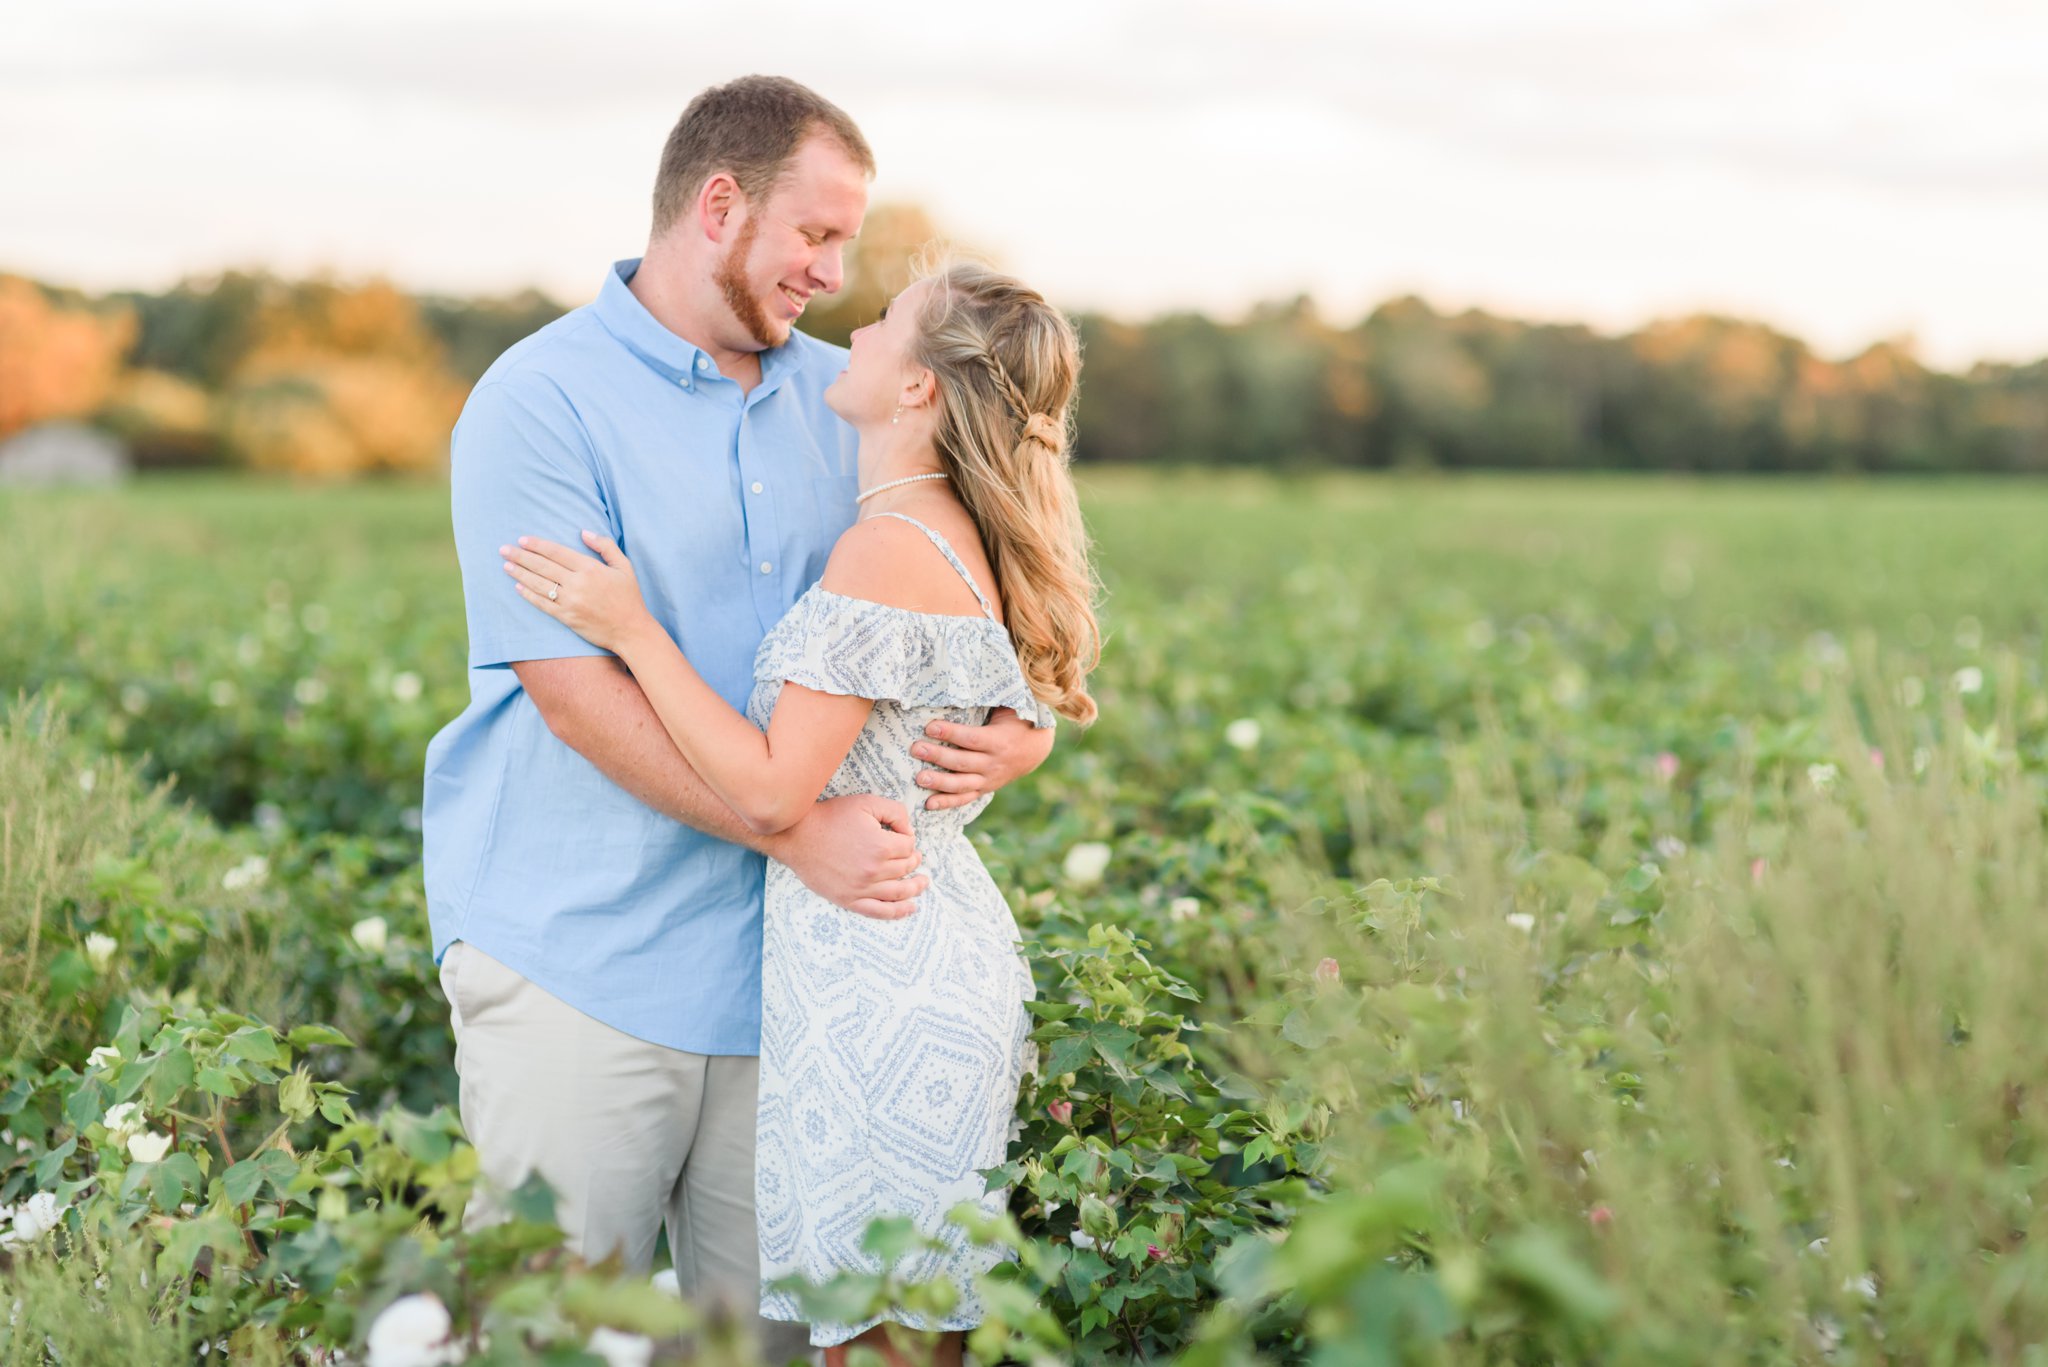  We ended the session in a nearby Cotton Field with the most AMAZING light!!!&nbsp; 